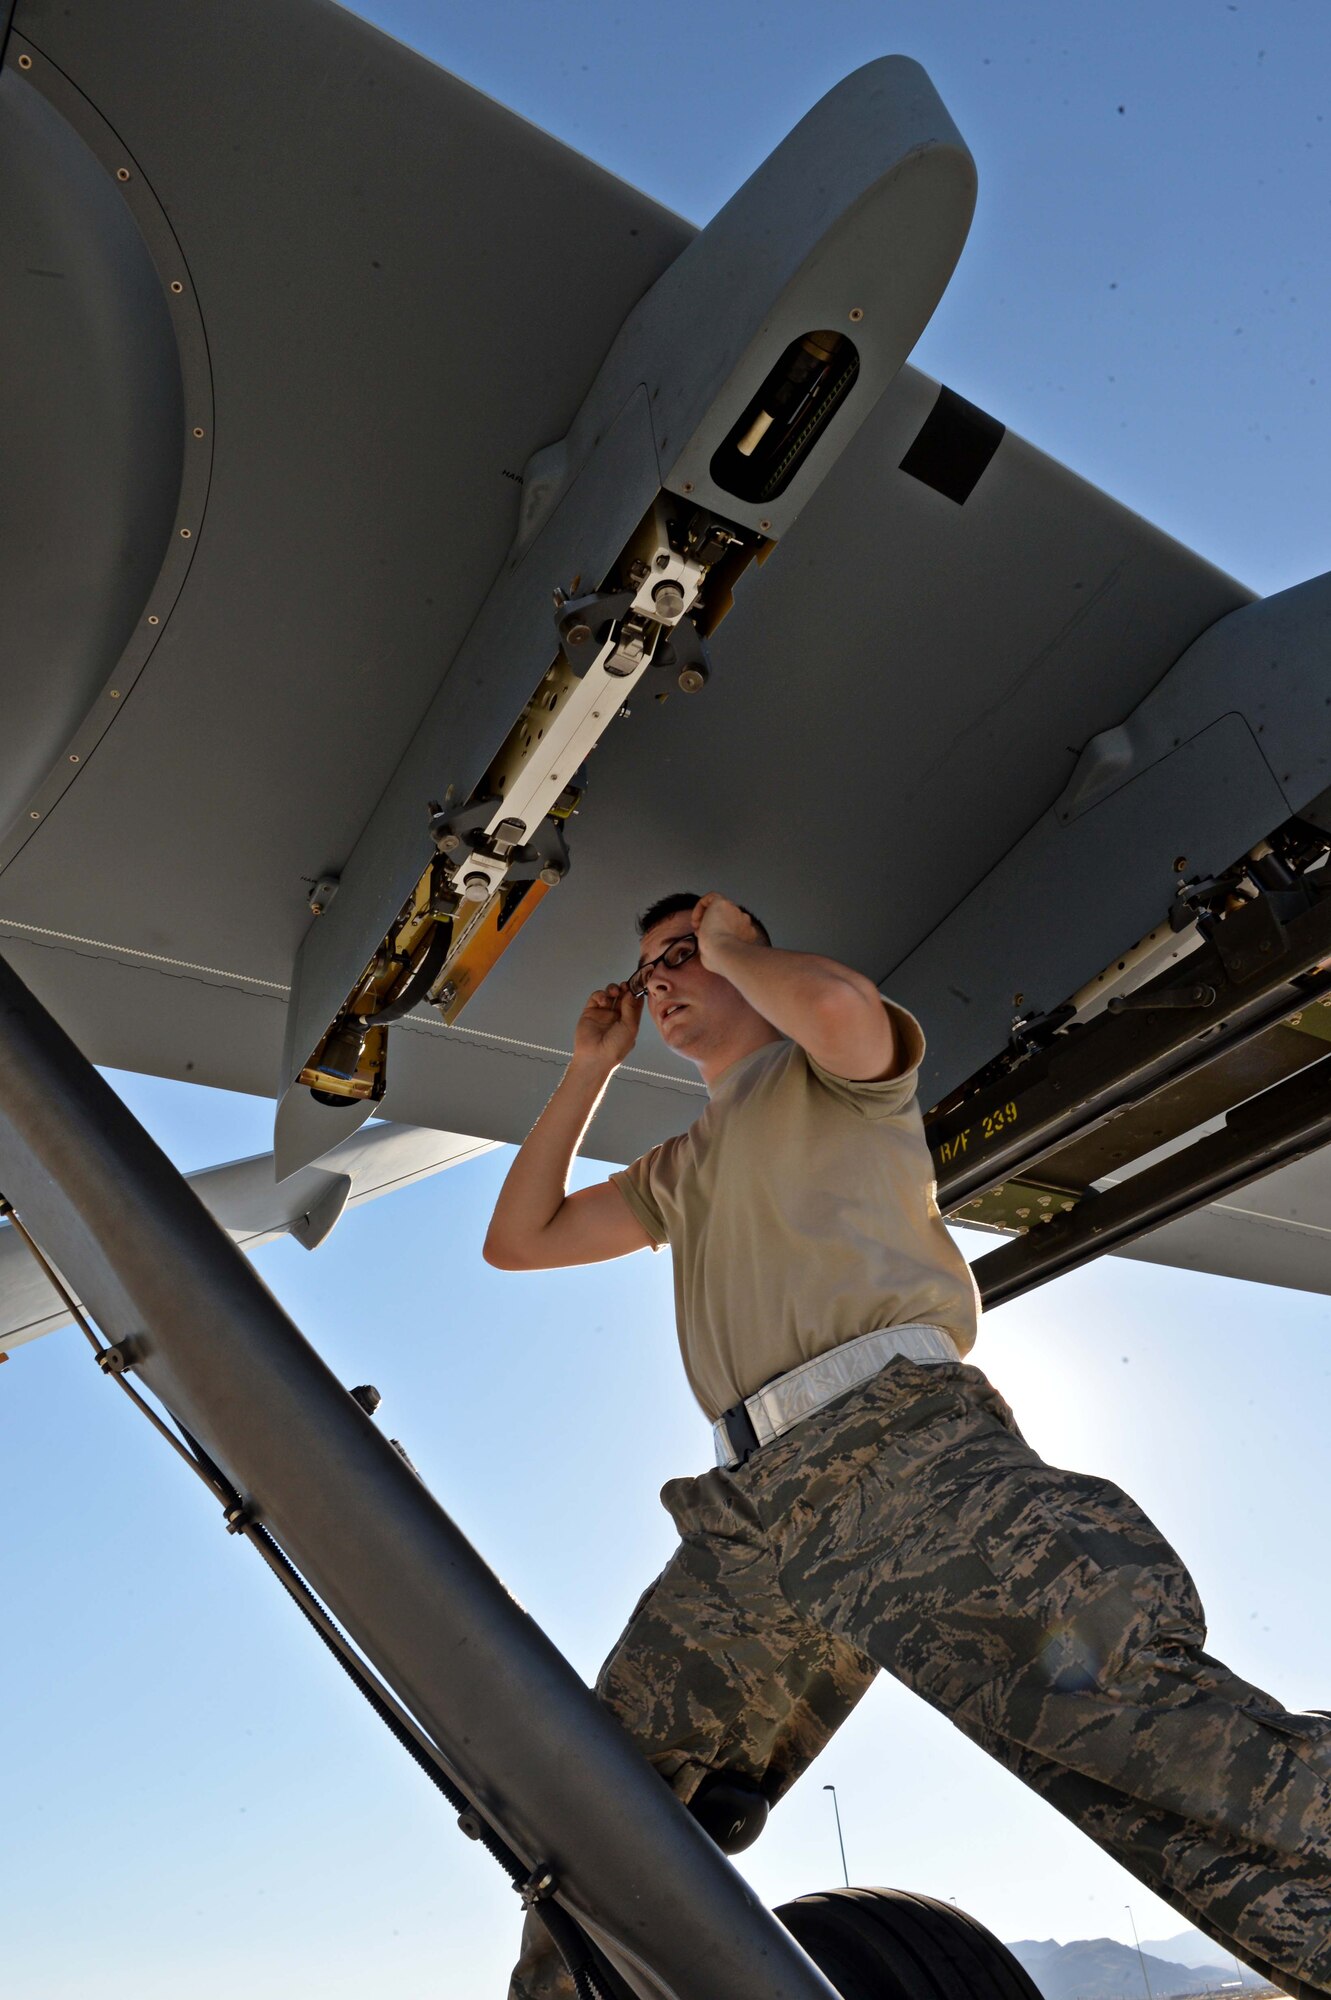 Airman 1st Class Zachary, 432nd Aircraft Maintenance Squadron weapons load crew member, inspects a munitions pylon in preparation for Red Flag 16-3 July 20, 2016, at Creech Air Force Base, Nevada. Airmen from the 432nd Wing/432nd Air Expeditionary Wing fly, maintain and support both the MQ-1 Predators and MQ-9 Reapers in Red Flag operations. (U.S. Air Force photo by Airman 1st Class Kristan Campbell/Released)